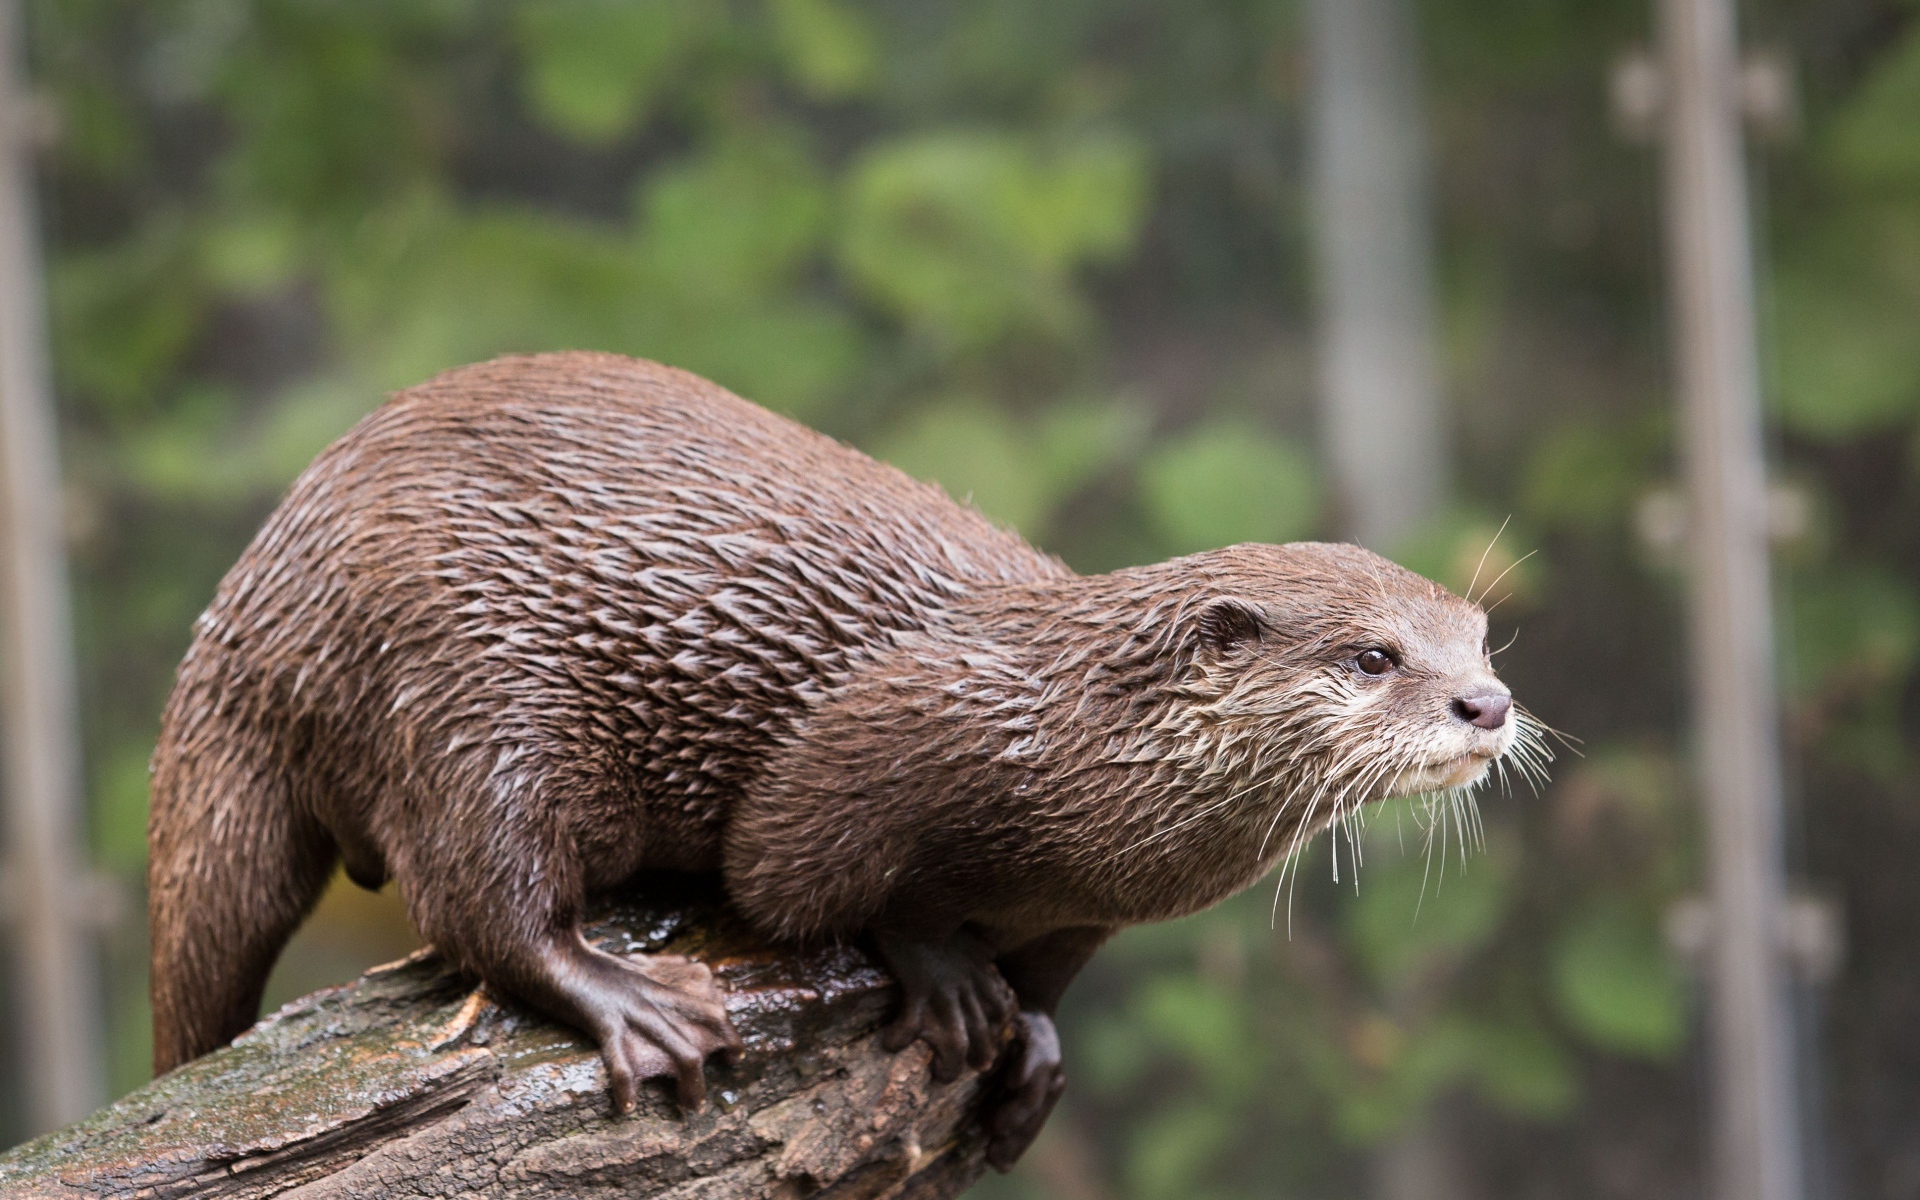 A wet otter stands on a tree